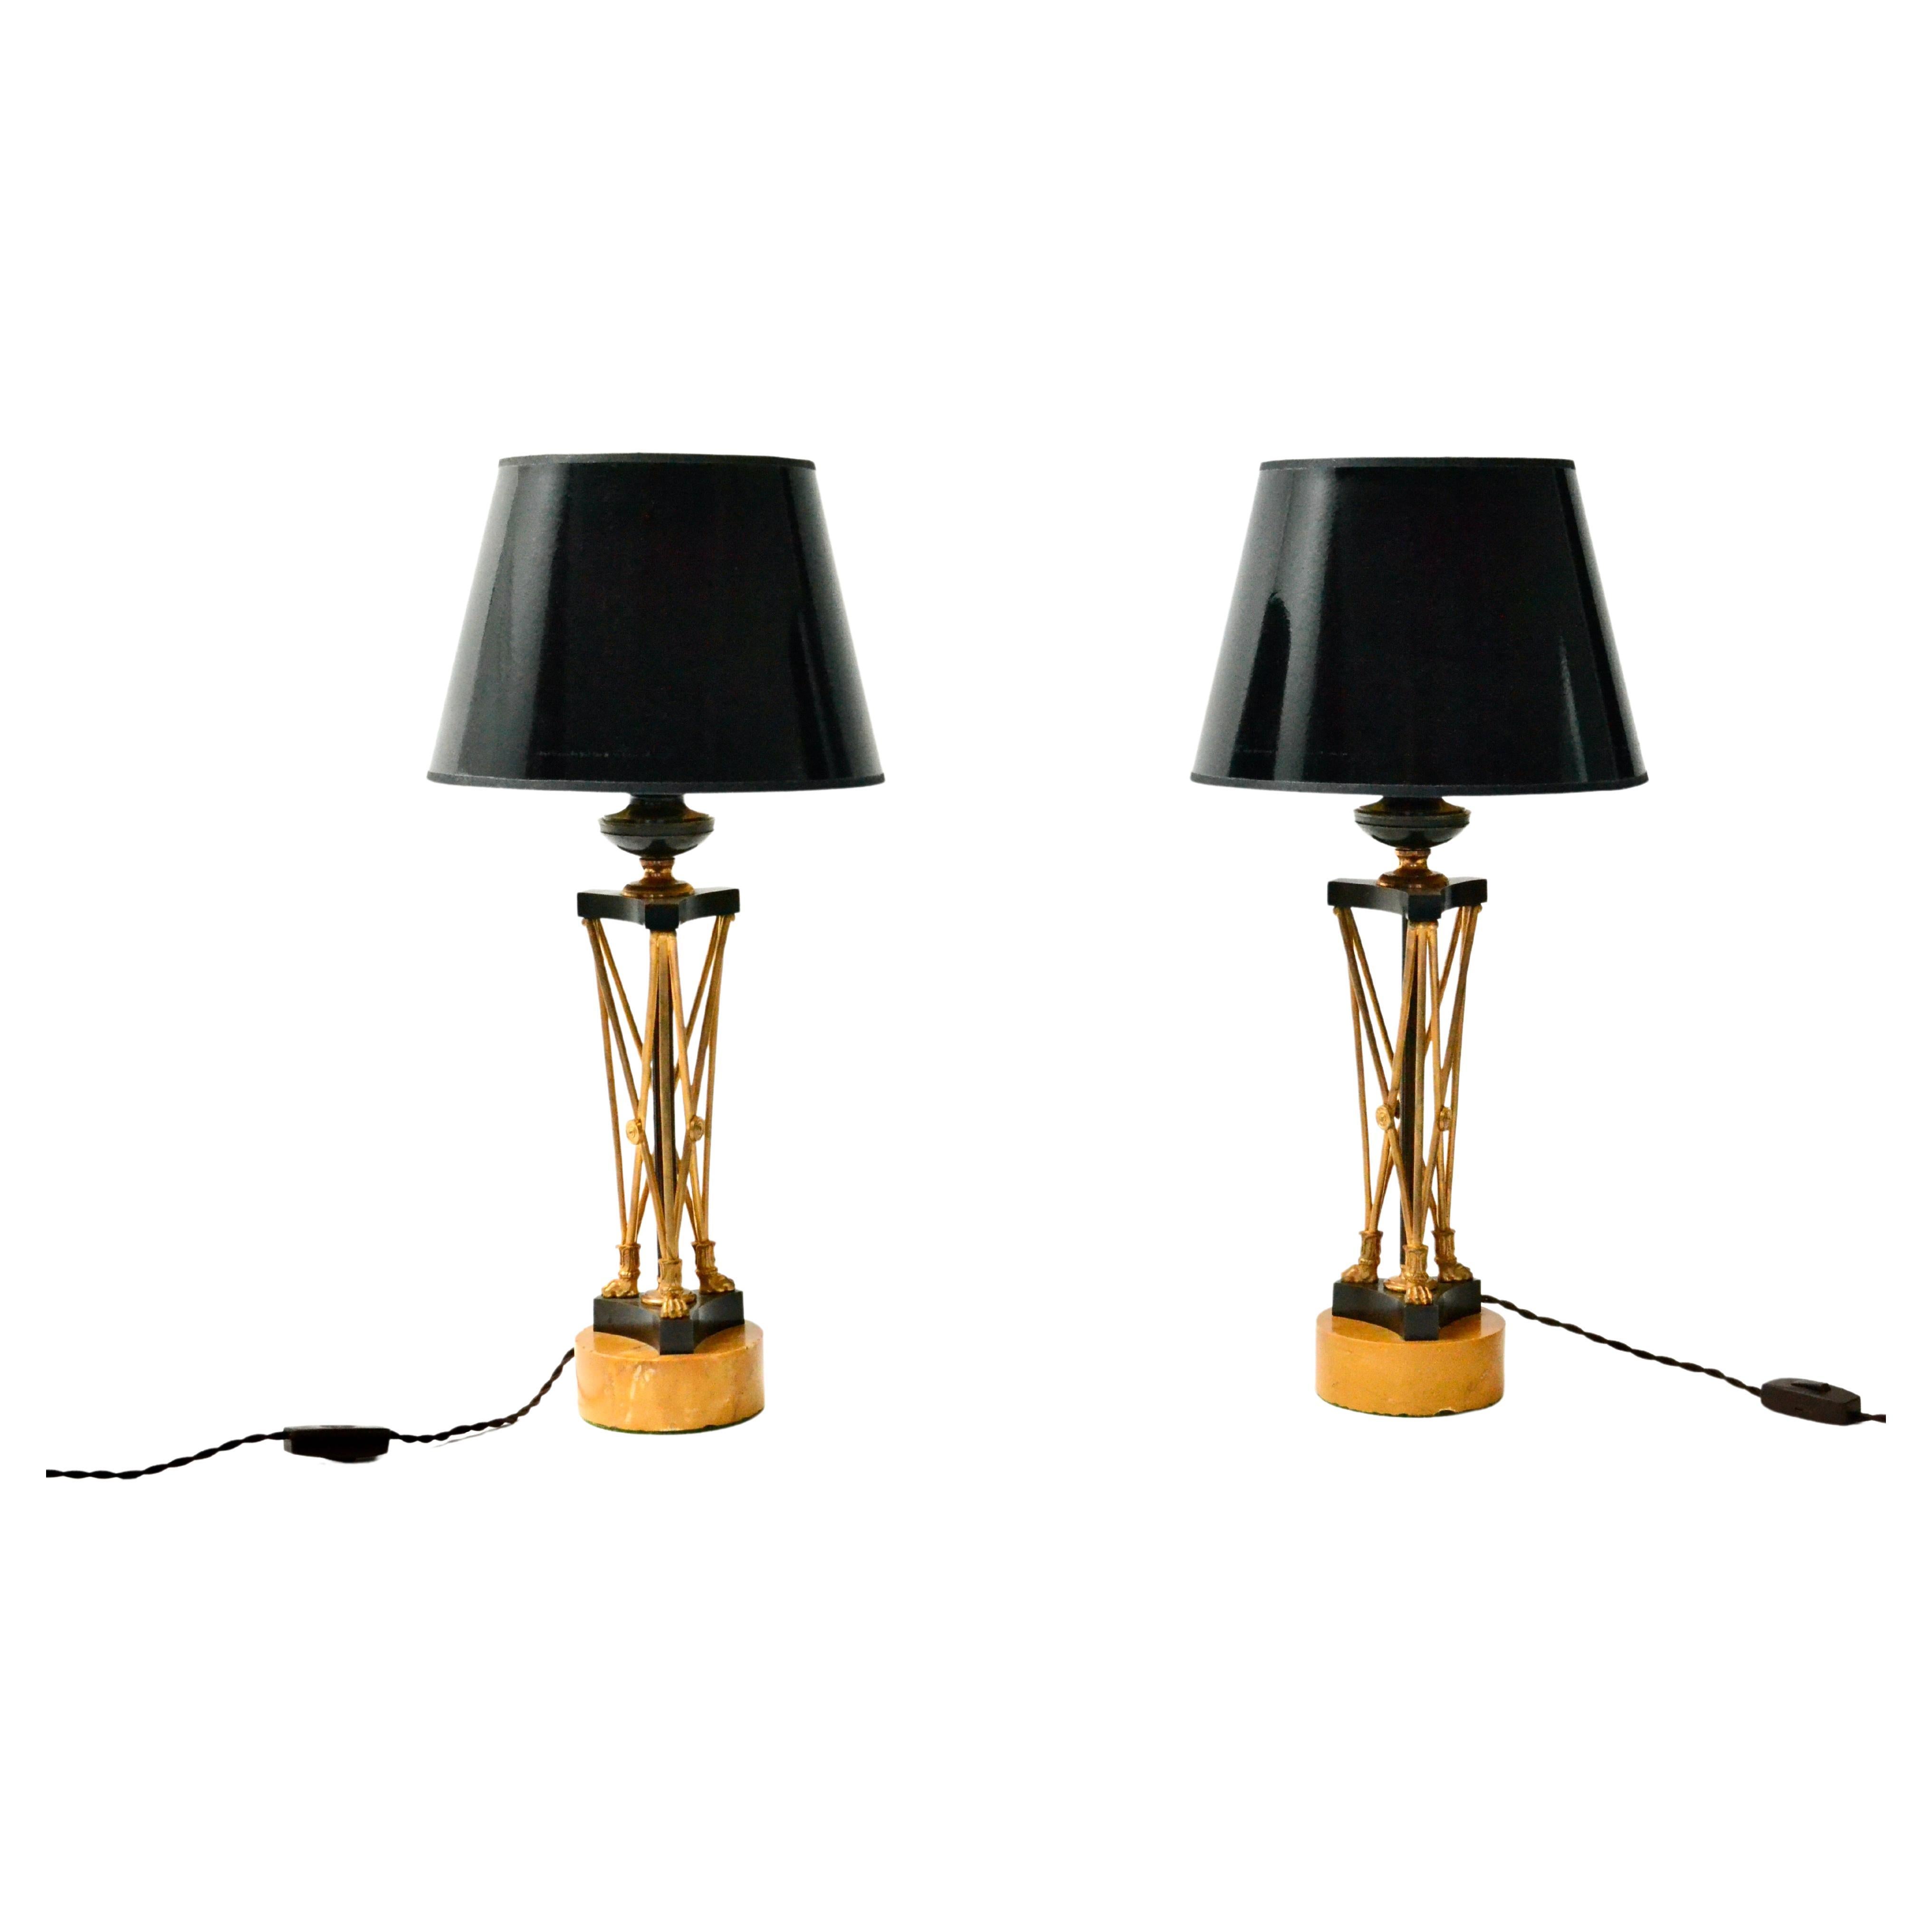 Pair of Regency Gilt and Patinated Bronze Candlesticks, Mounted as Lamps. For Sale